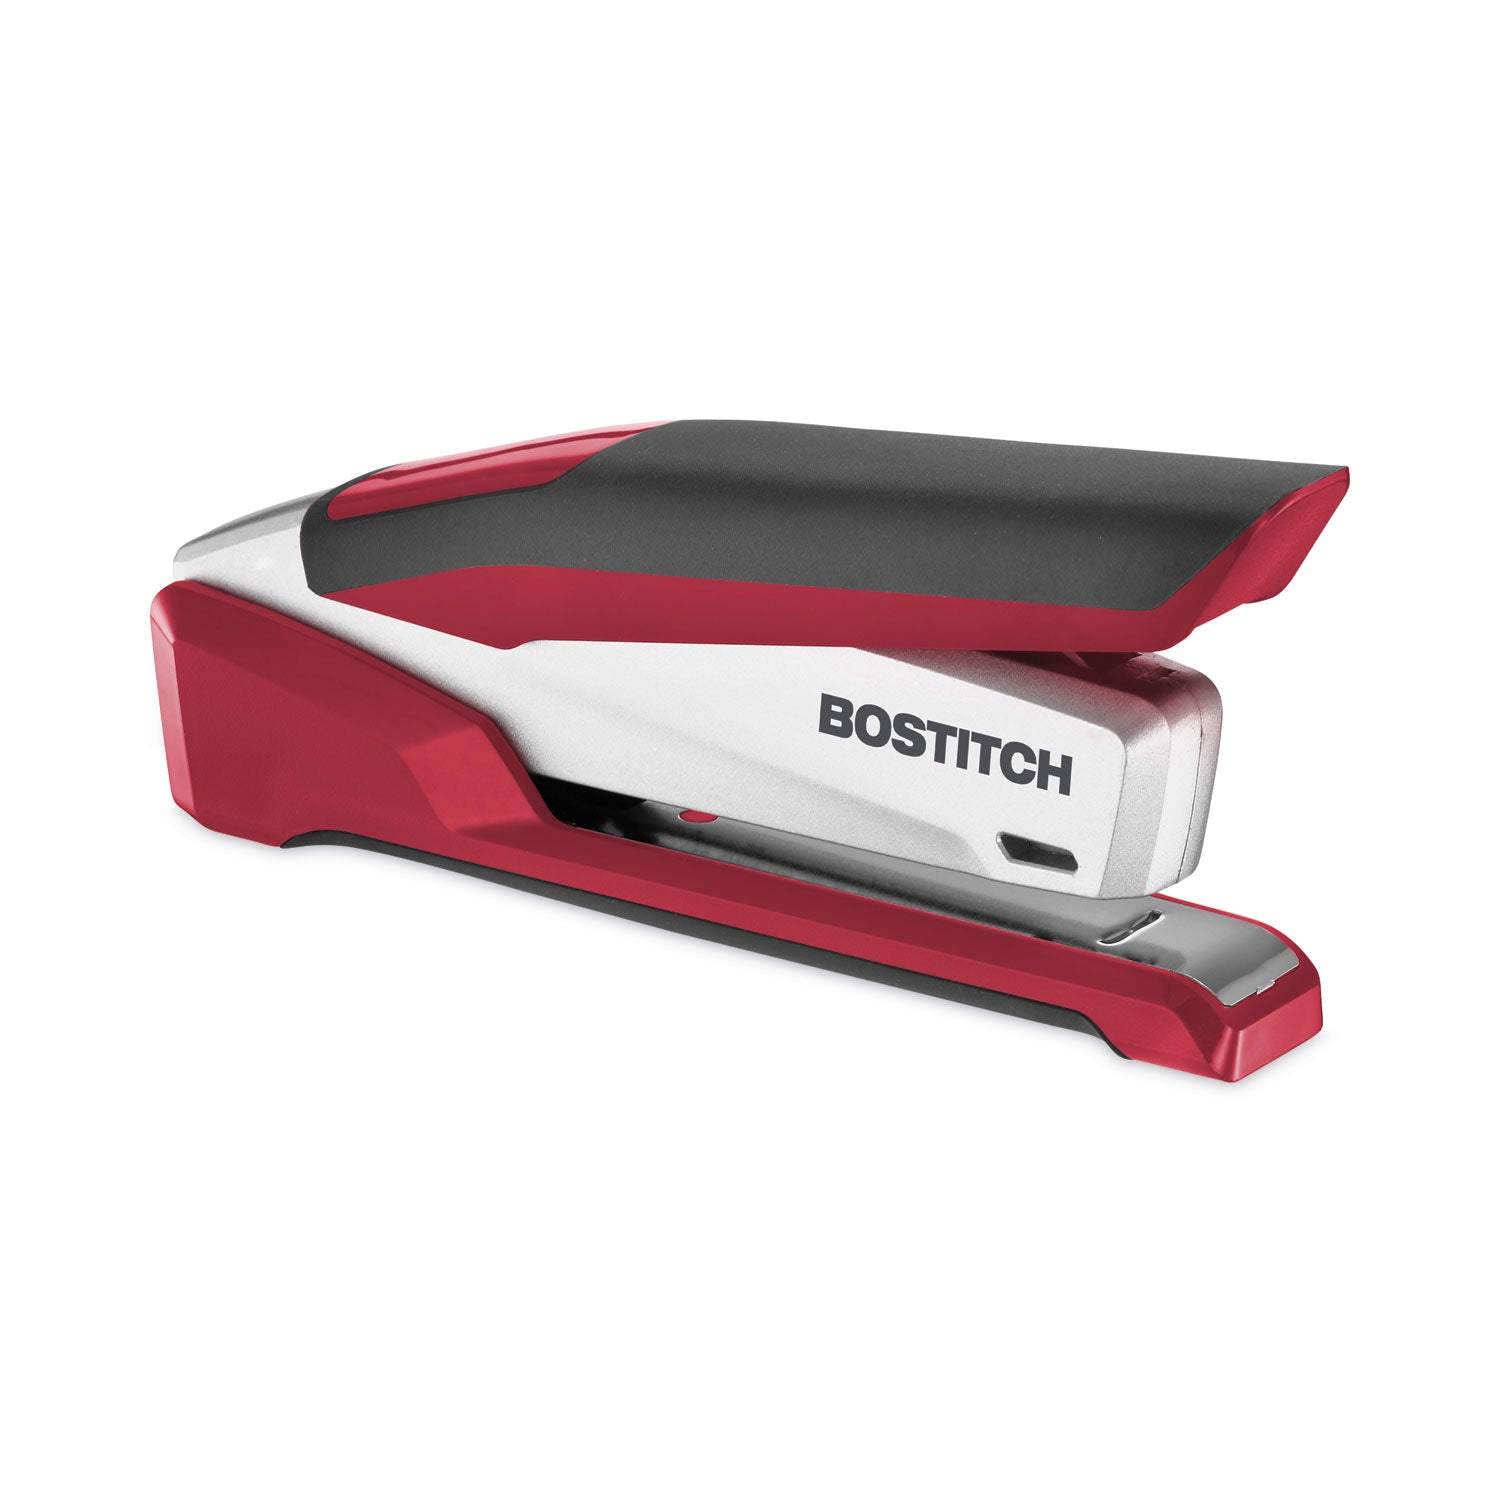 InPower One-Finger 3-in-1 Desktop Stapler with Antimicrobial Protection, 28-Sheet Capacity, Red/Silver - 